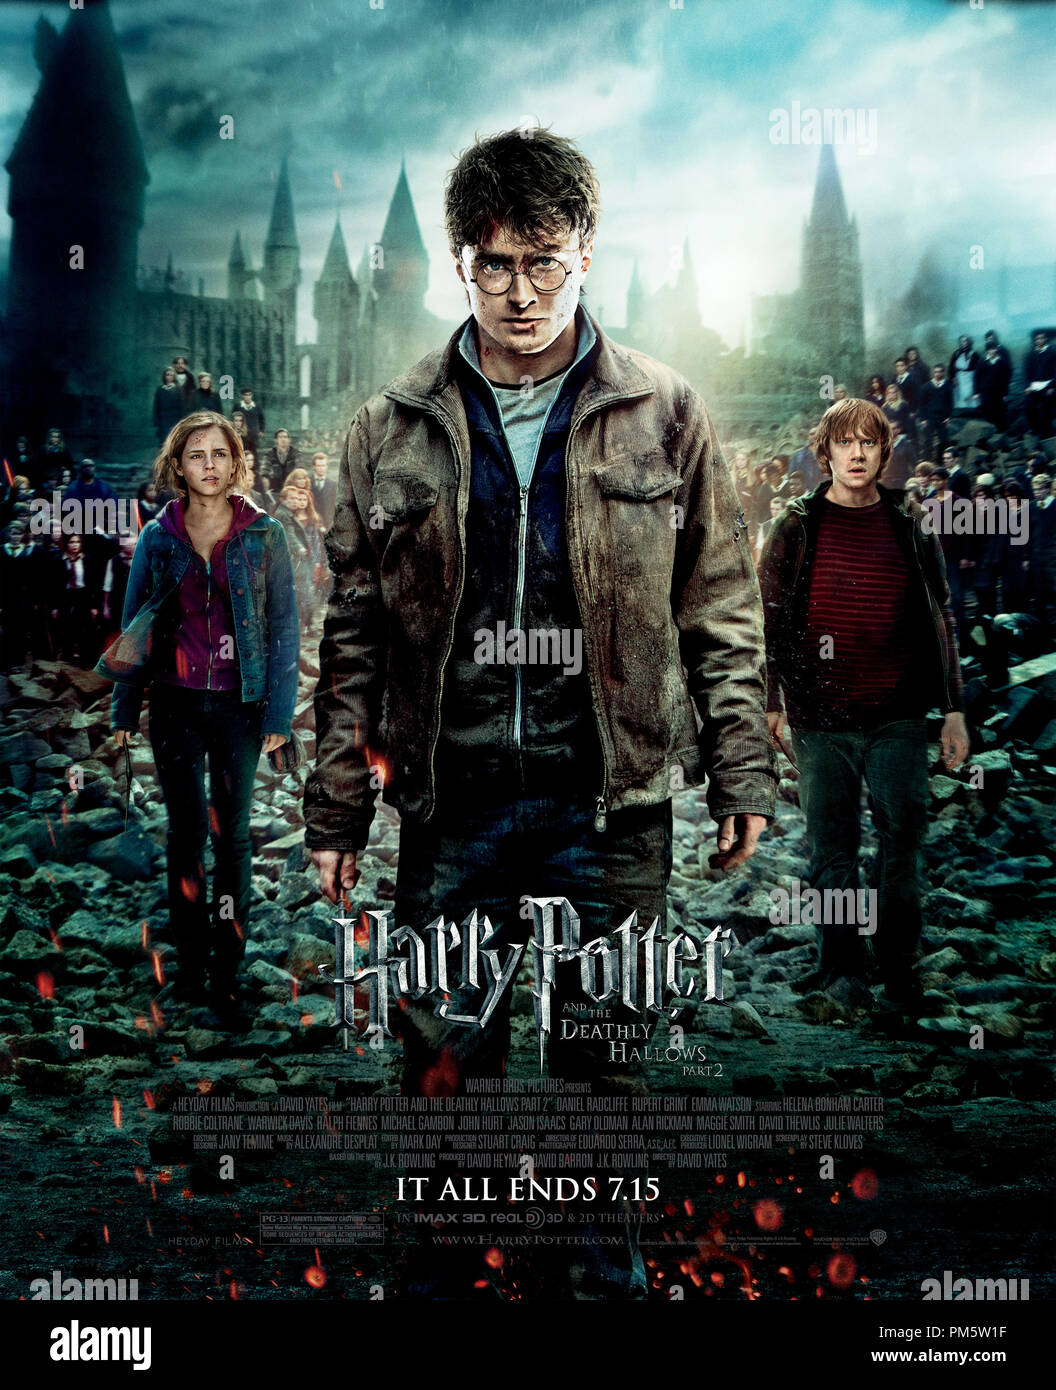 Wizard Series Posters : harry potter poster